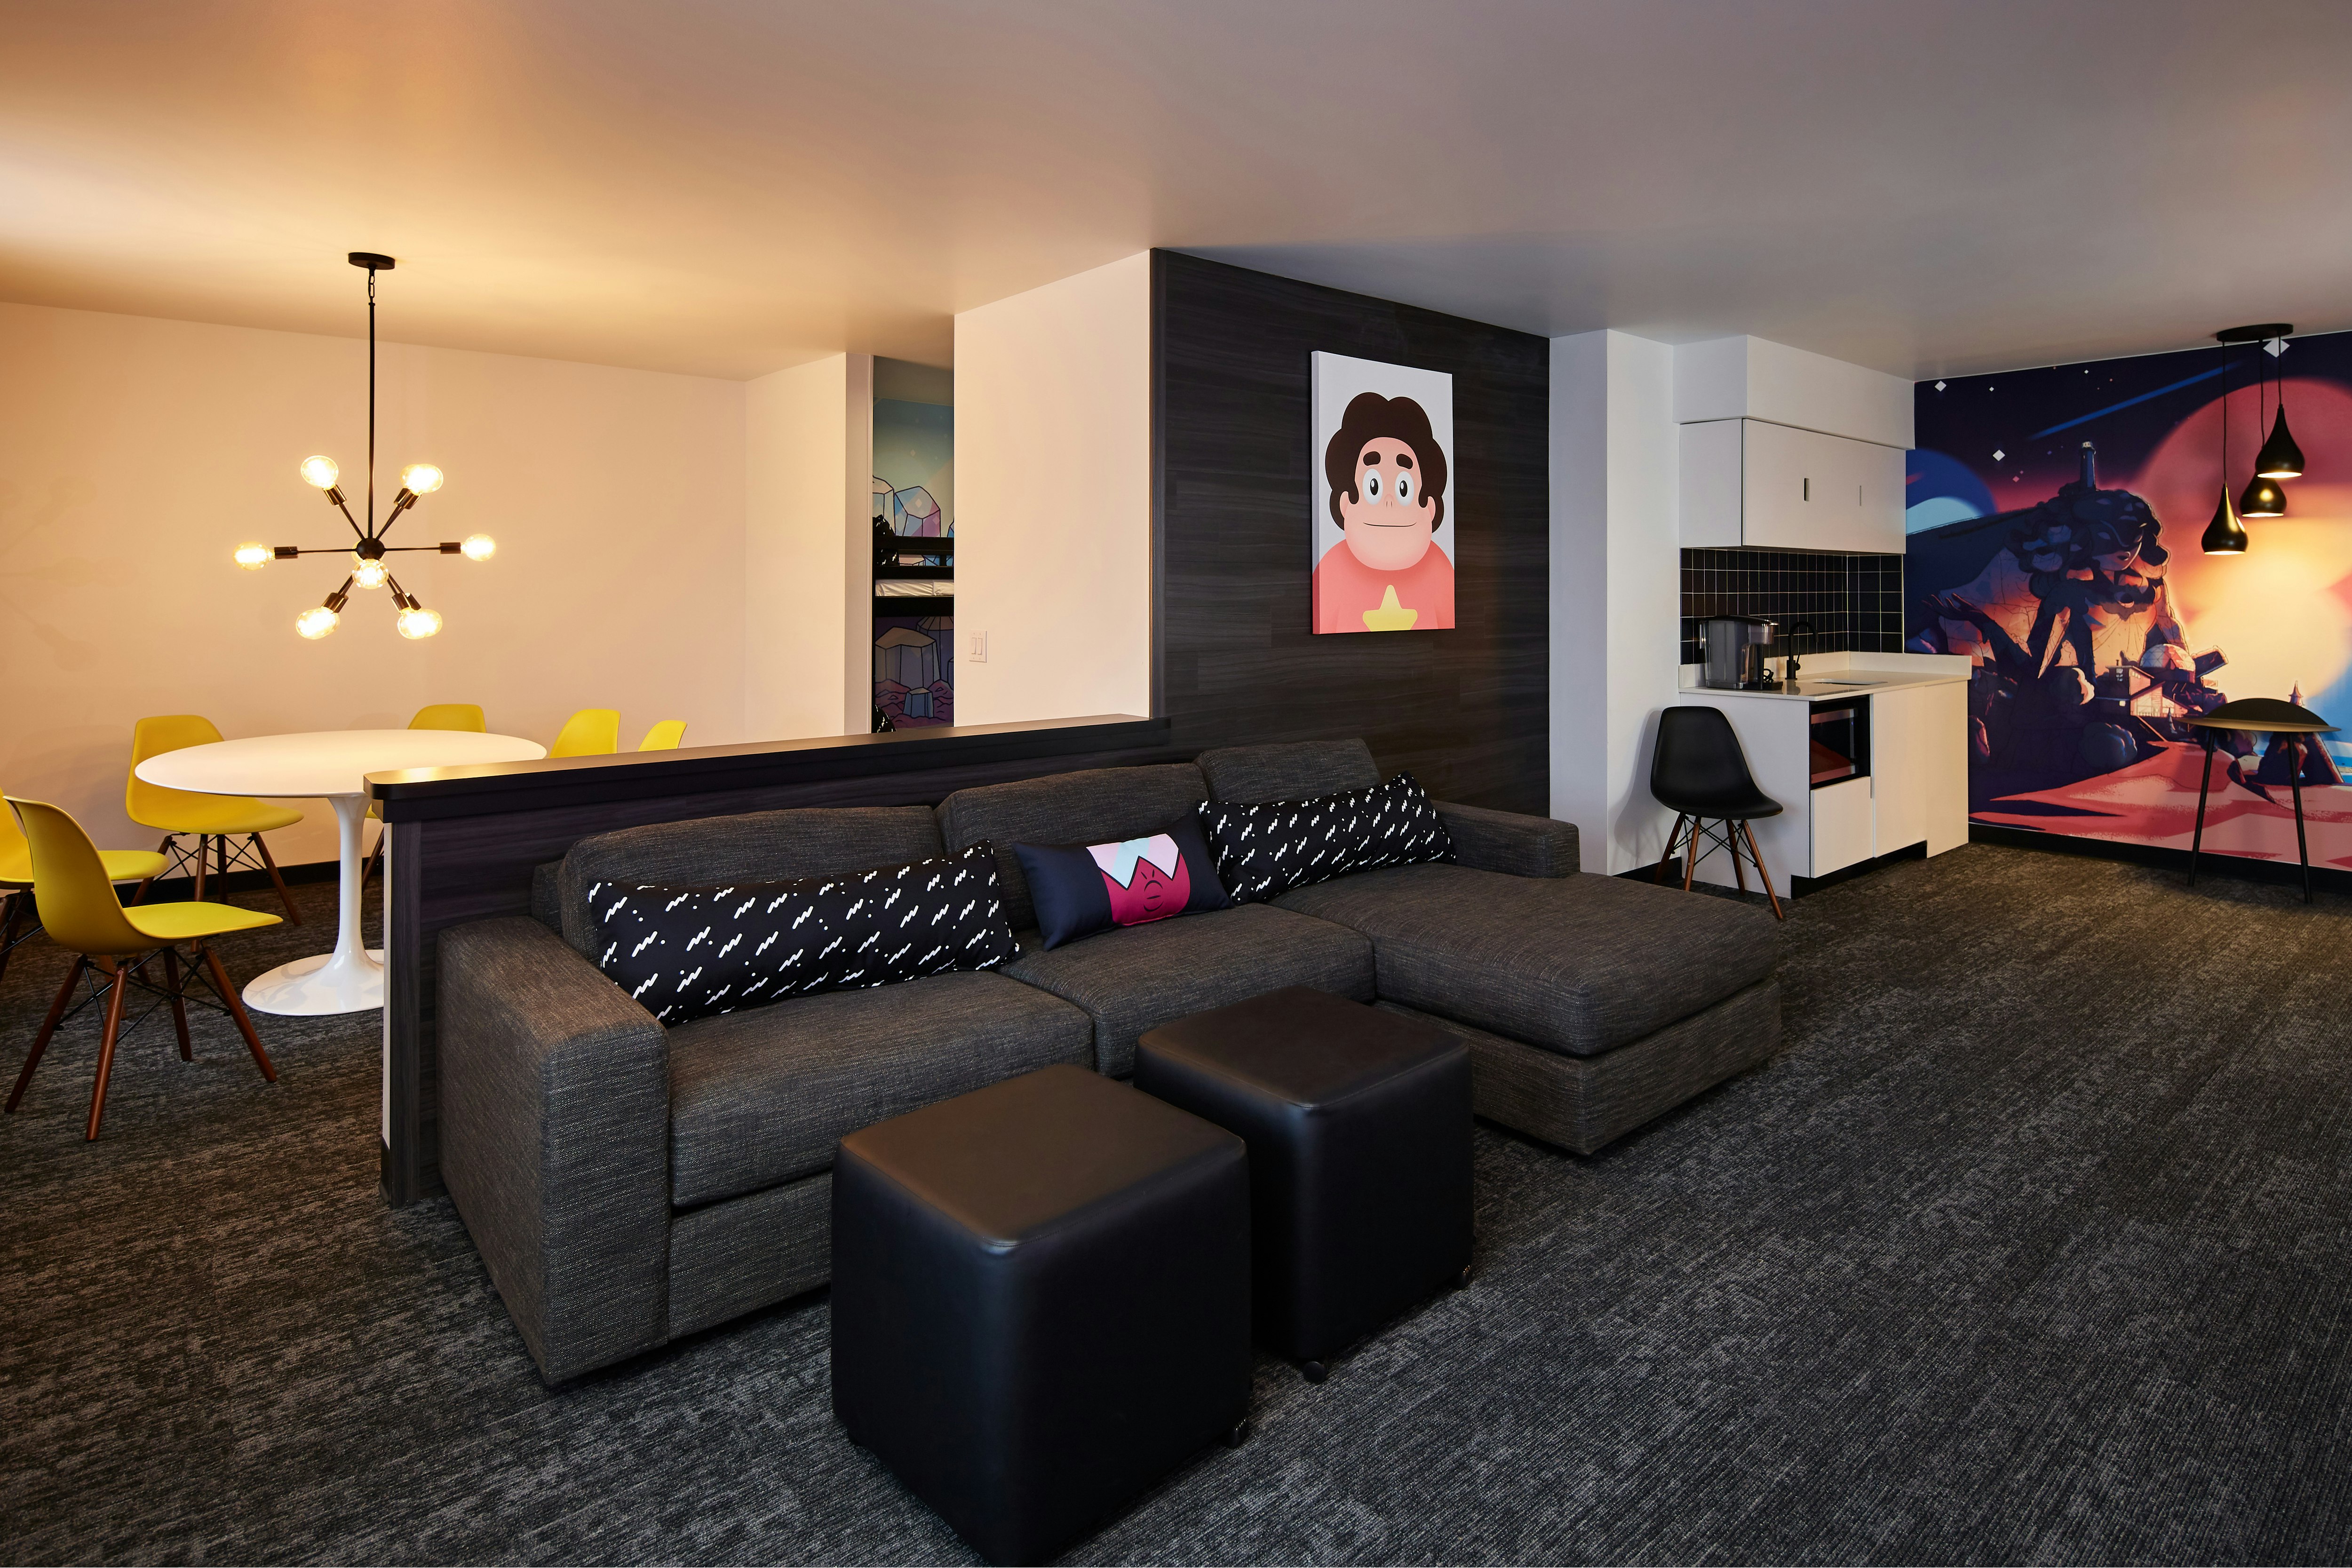 A hotel suite decorated with Ben 10 cartoon themes